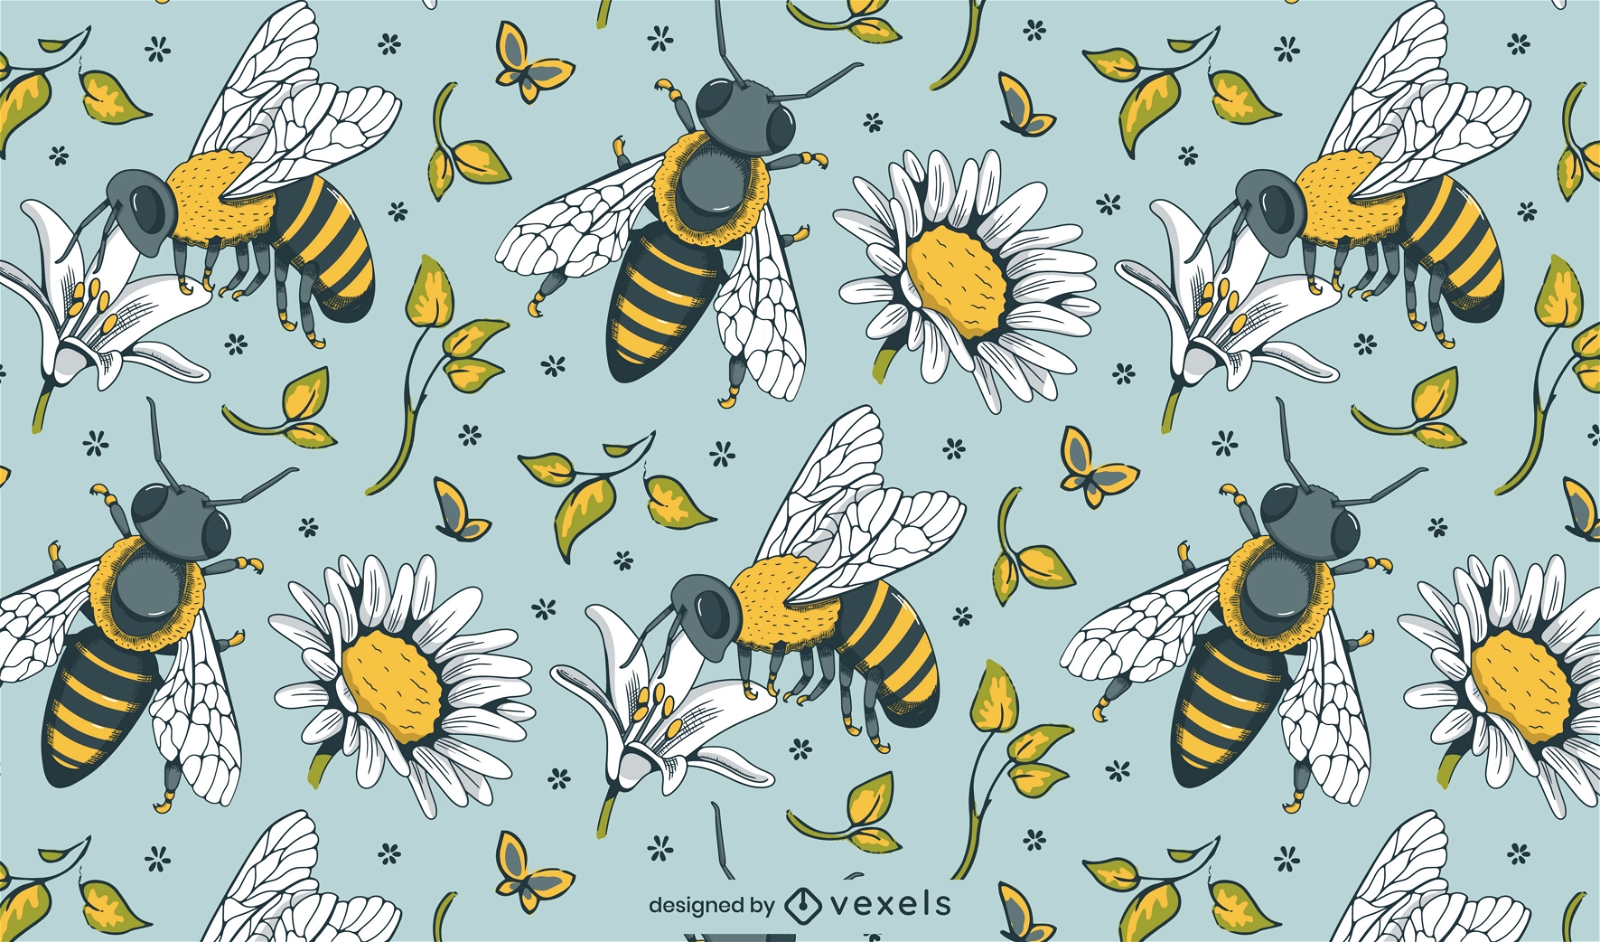 Vintage bees and daisies tileable pattern design